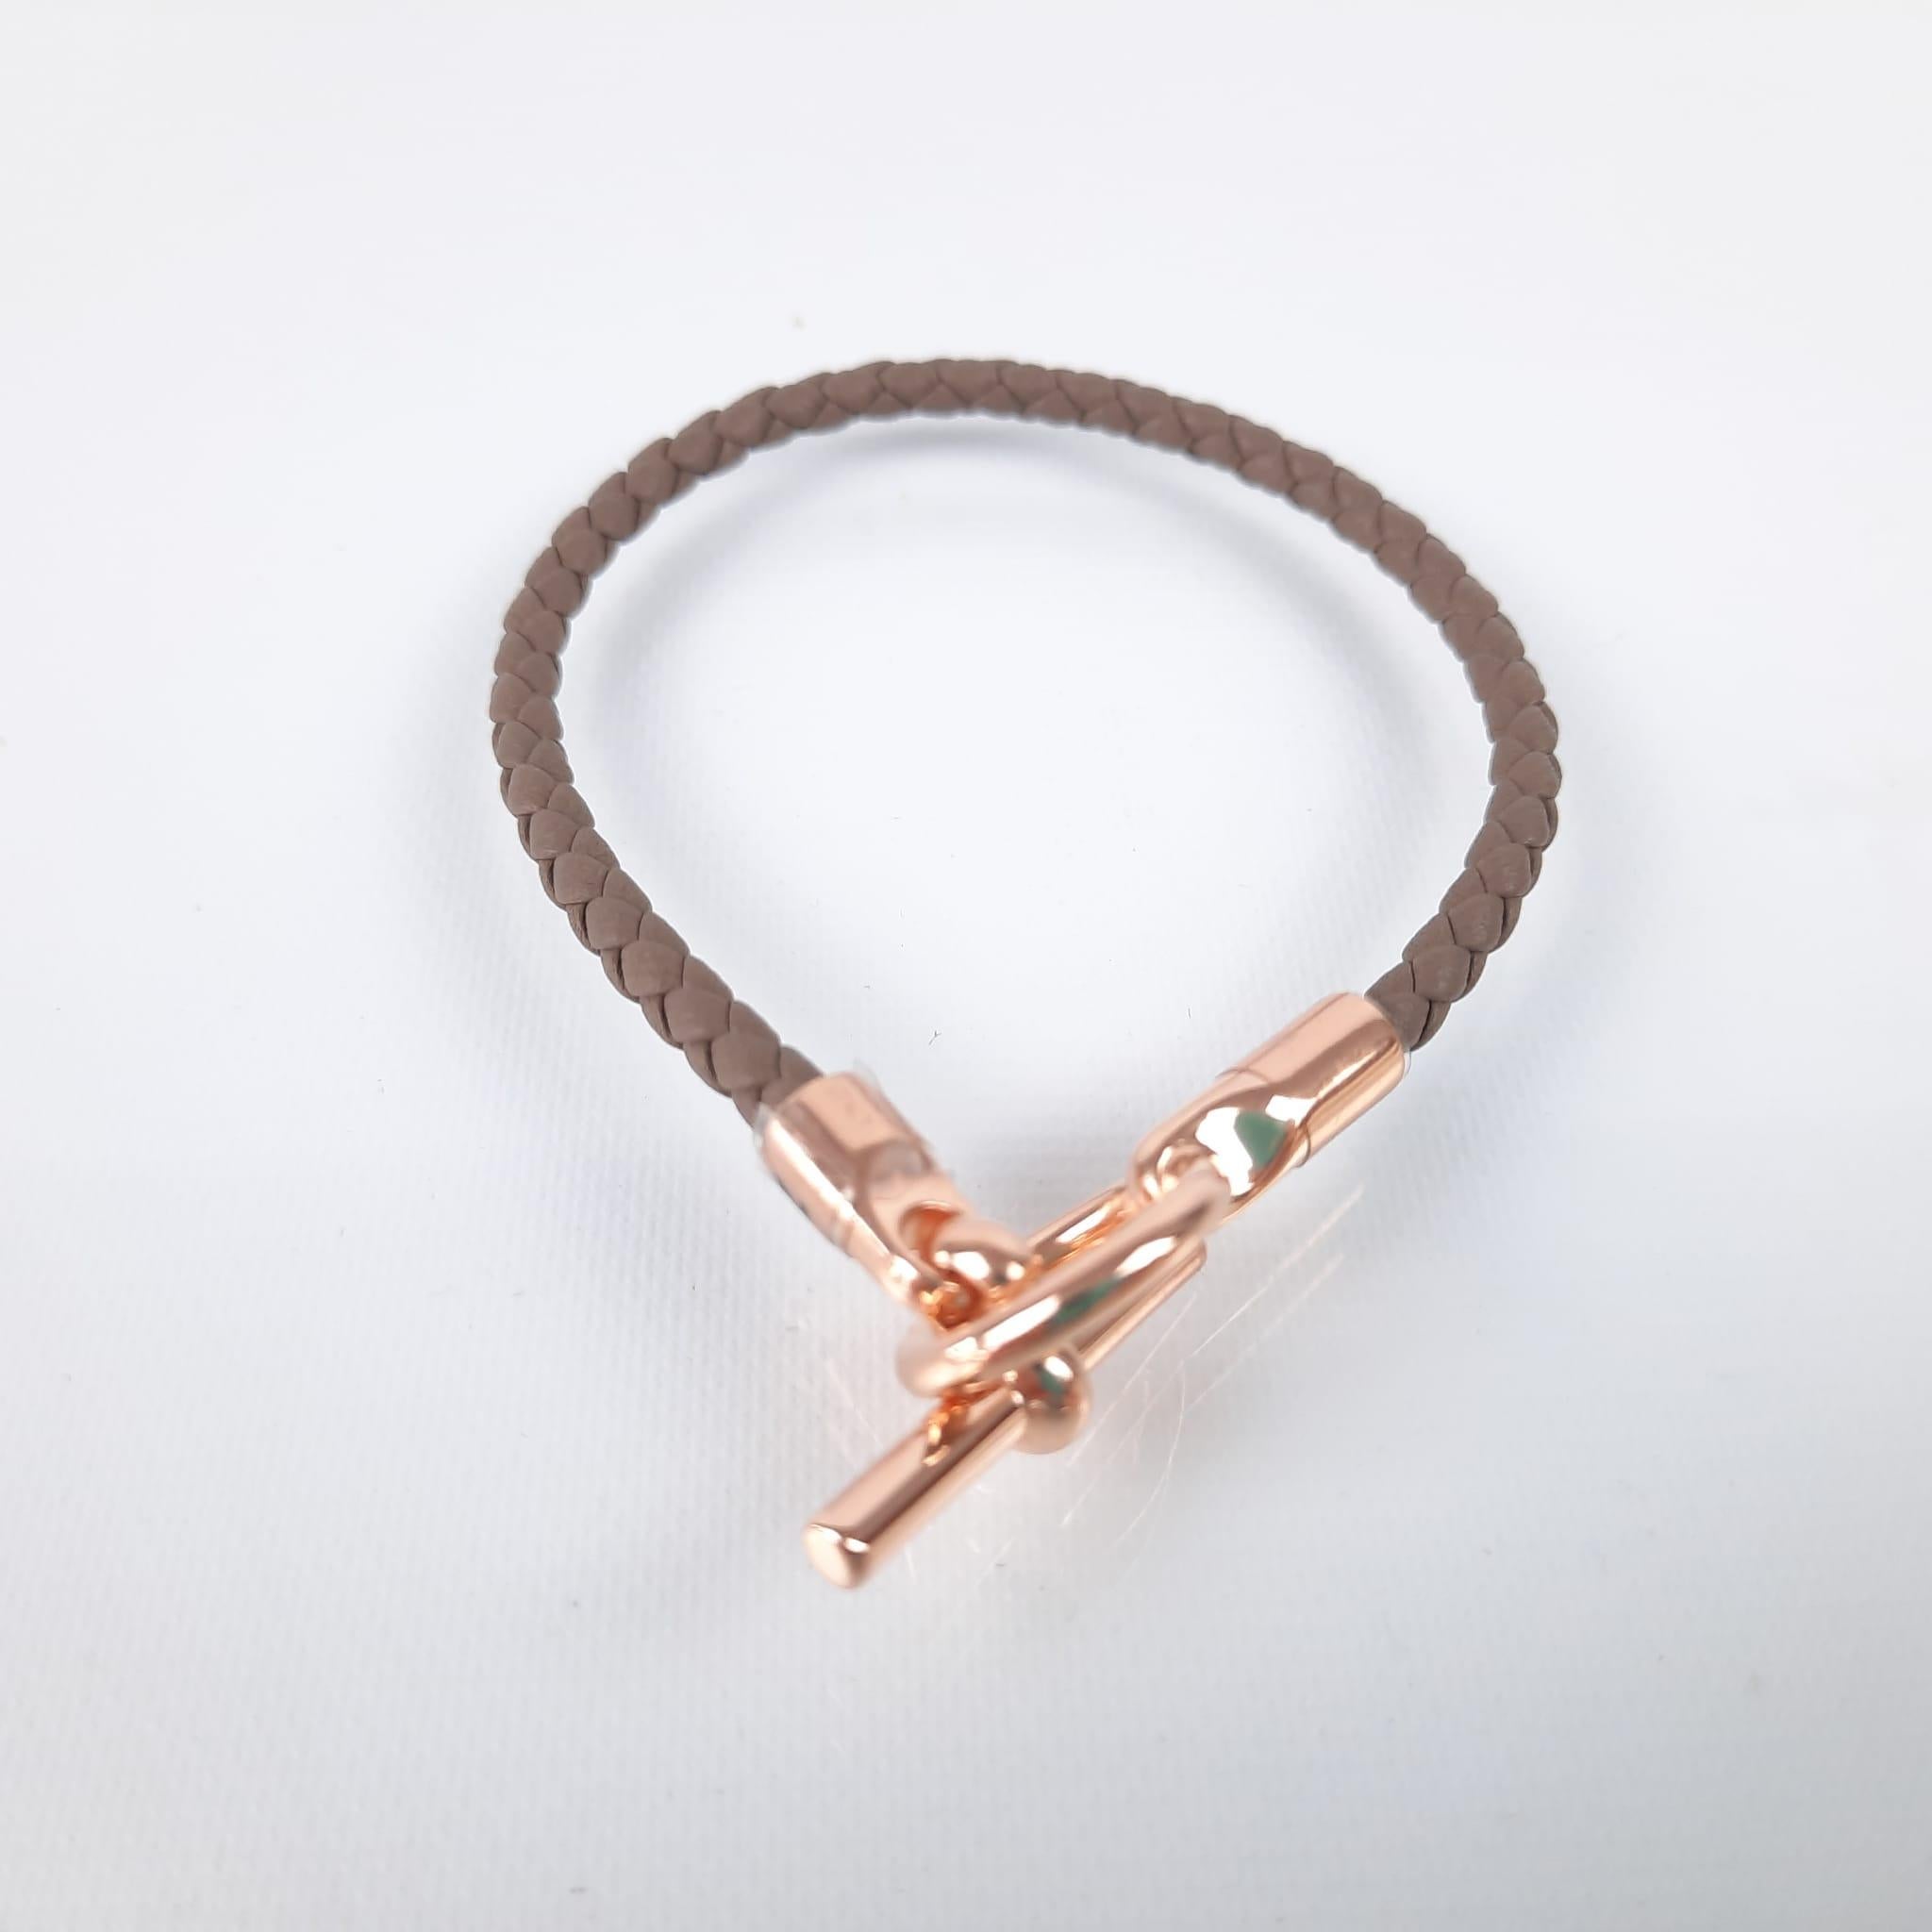 Size T2. Preloved, never used with Box. Braided bracelet in Swift calfskin with rose gold-plated Glenan closure. Wrist size from 14.5 to 15.5 cm
Braid width: 0.3 cm